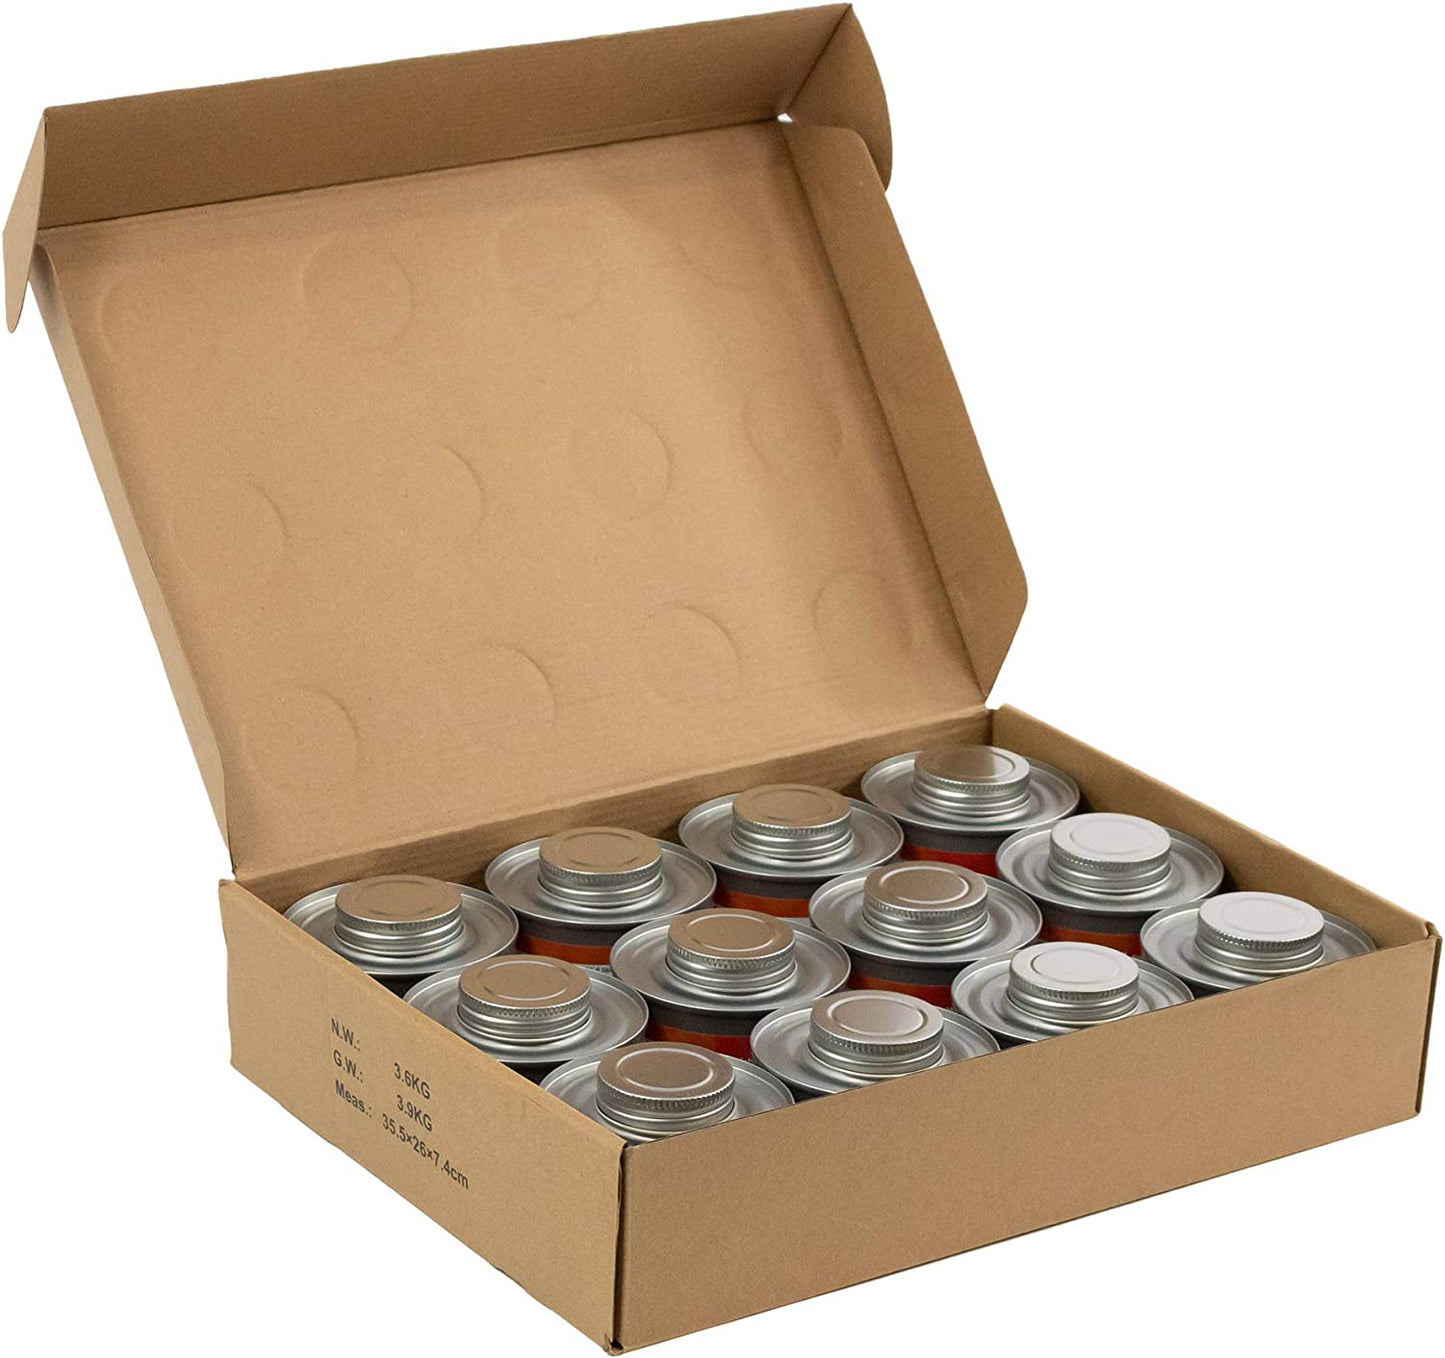 New & Improved! Emergency Cooking Fuel Premium Storage Set, 20+ Year Shelf Life | Available in 4 Cans, 12 Cans, or 24 Can Packs